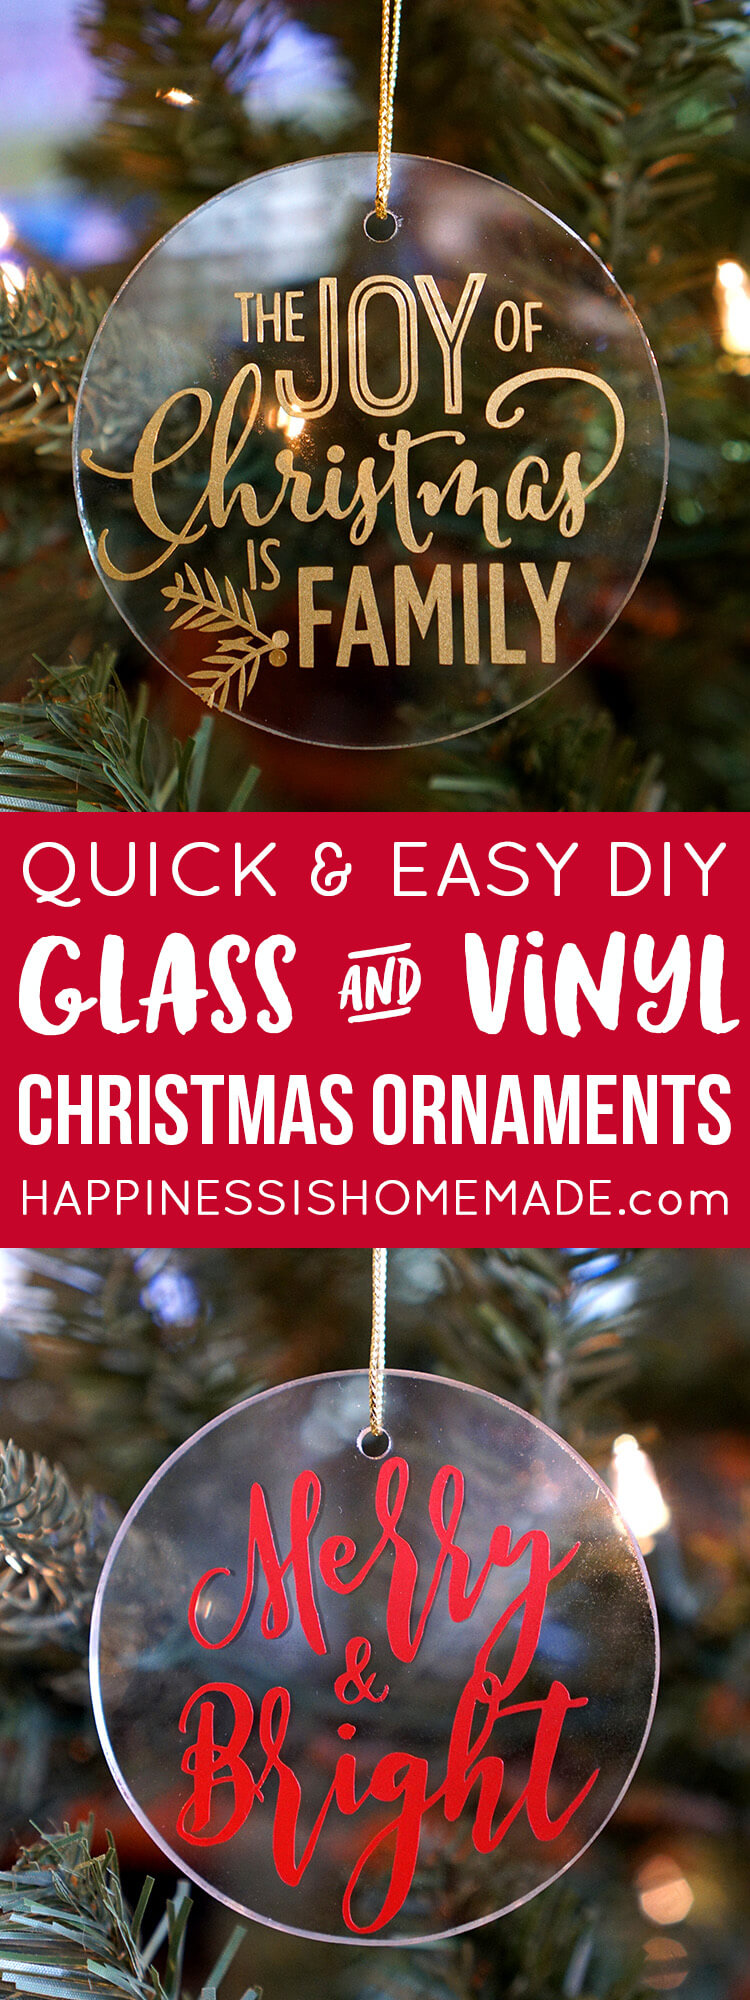 quick and easy diy glass and vinyl christmas ornaments